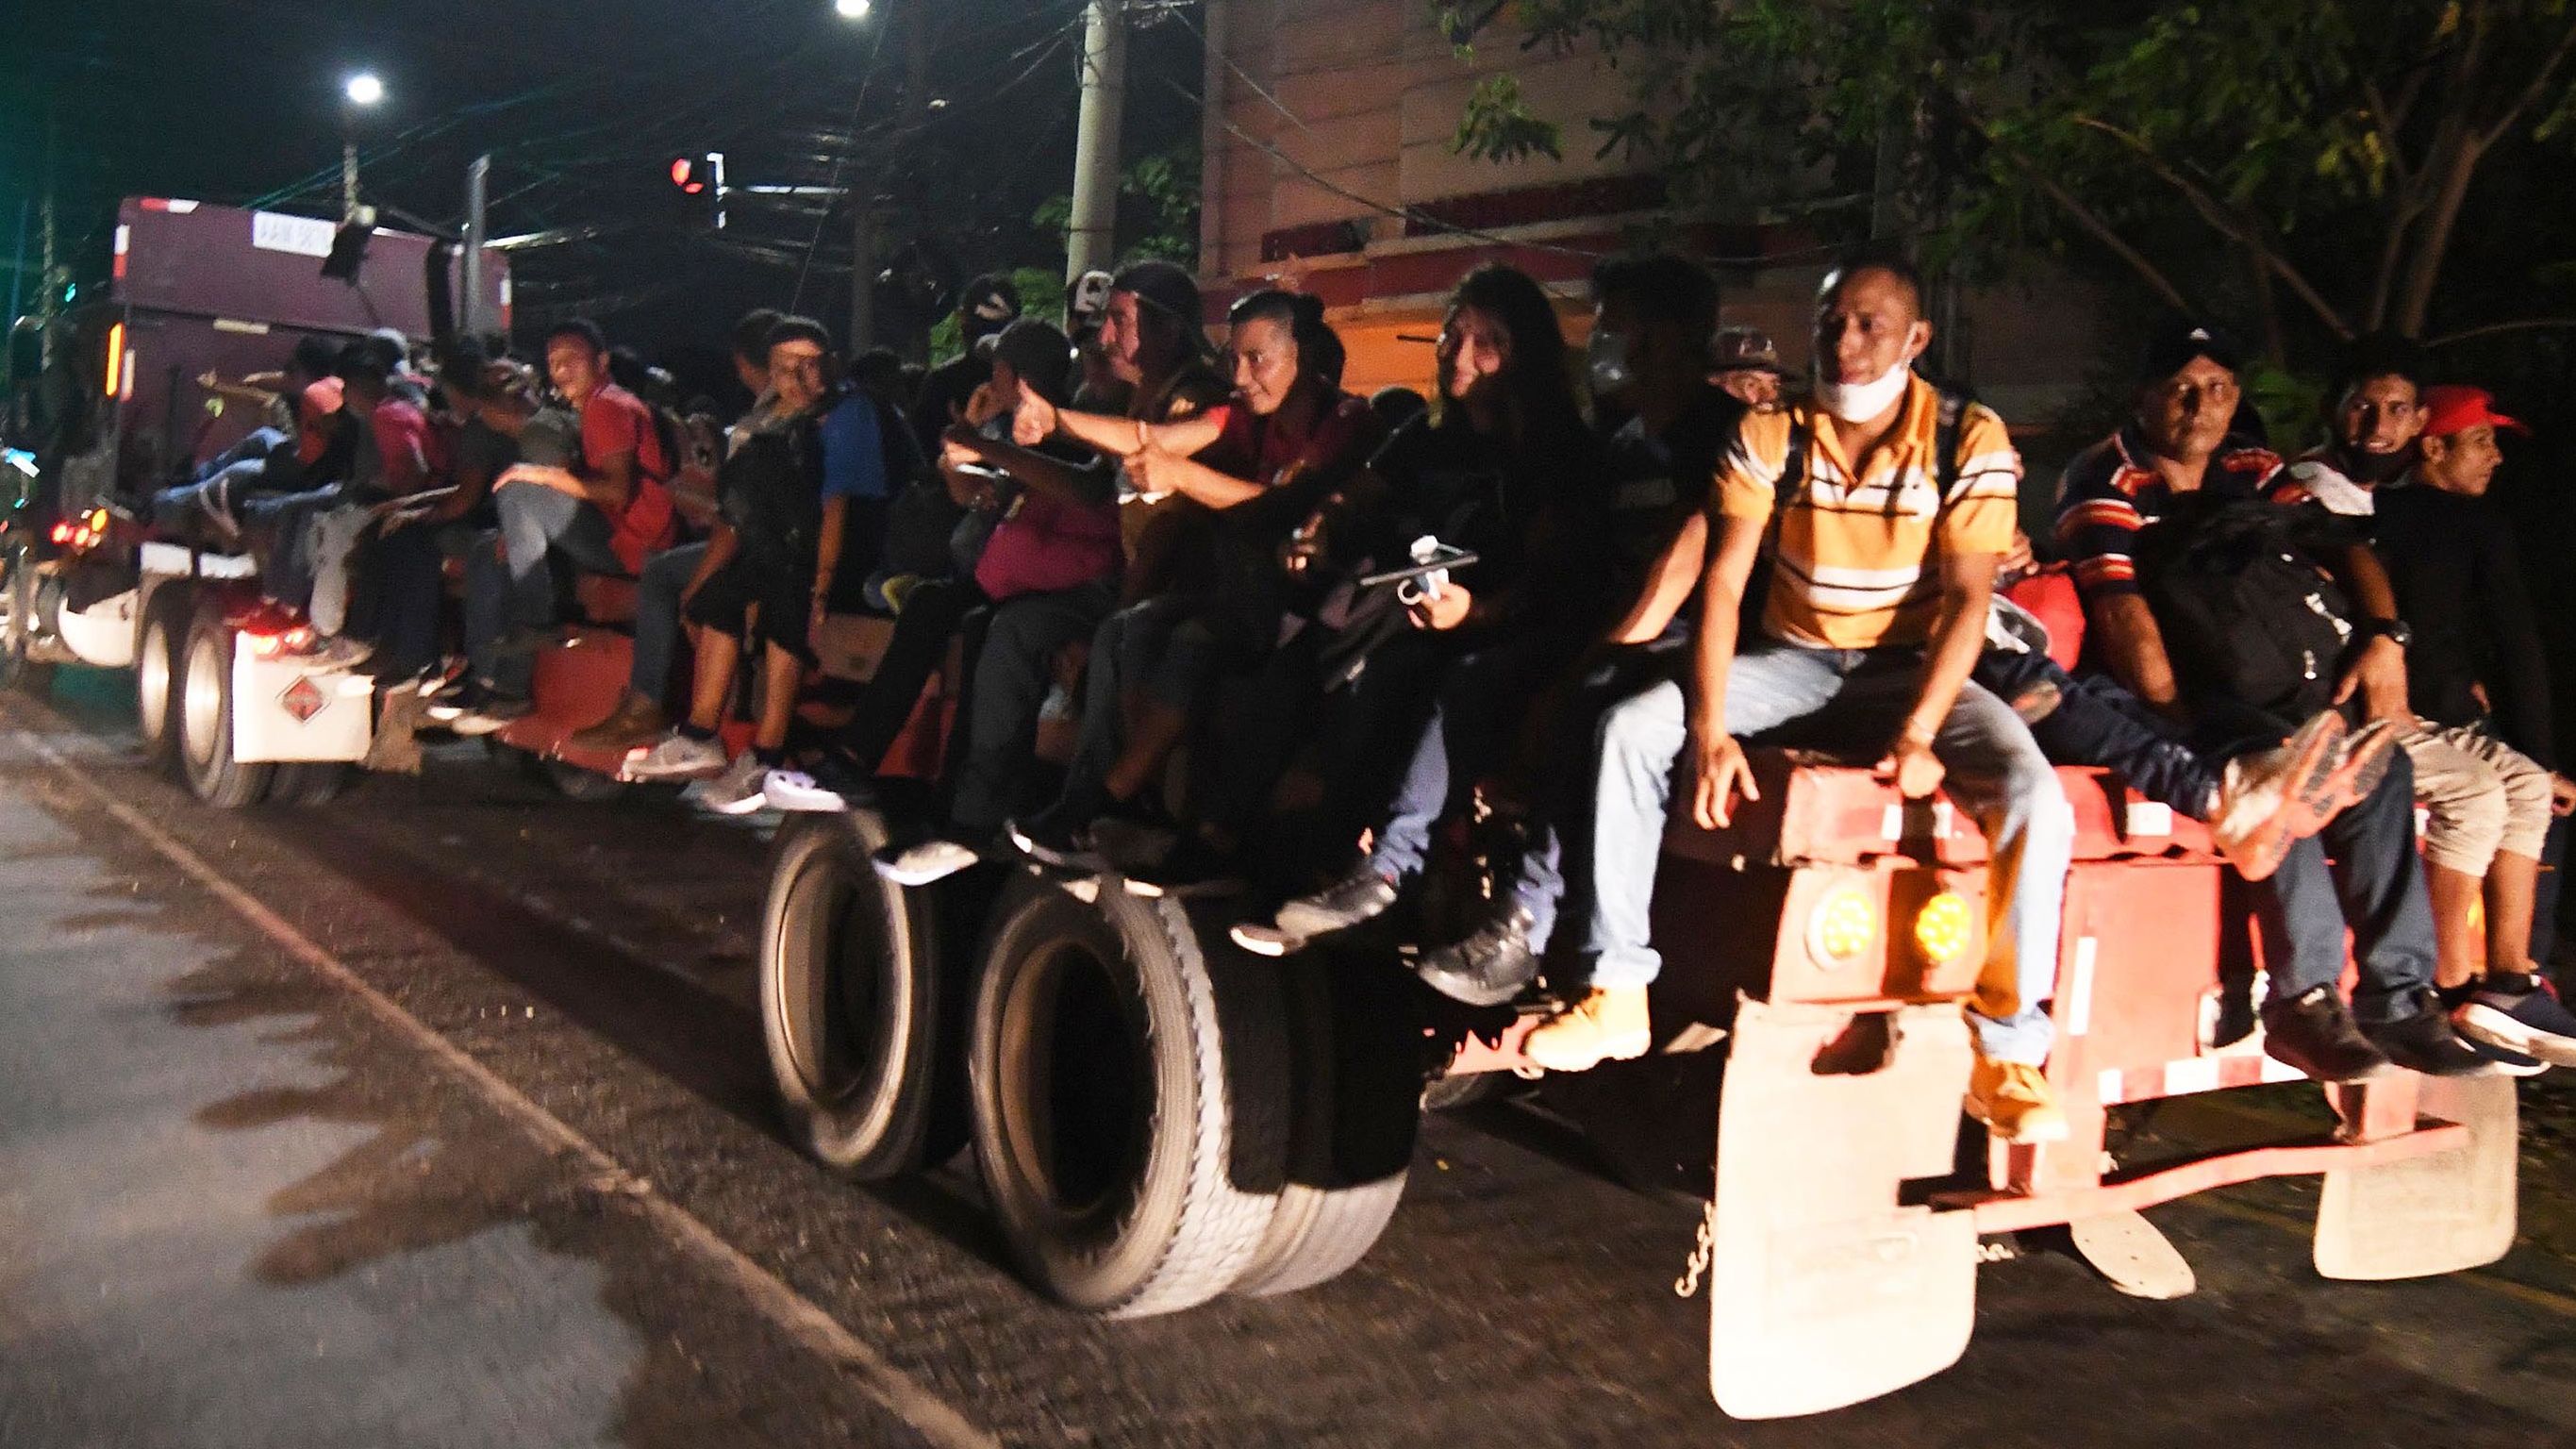 Hondurans sit on the flat bed of a truck as they leave for the US.